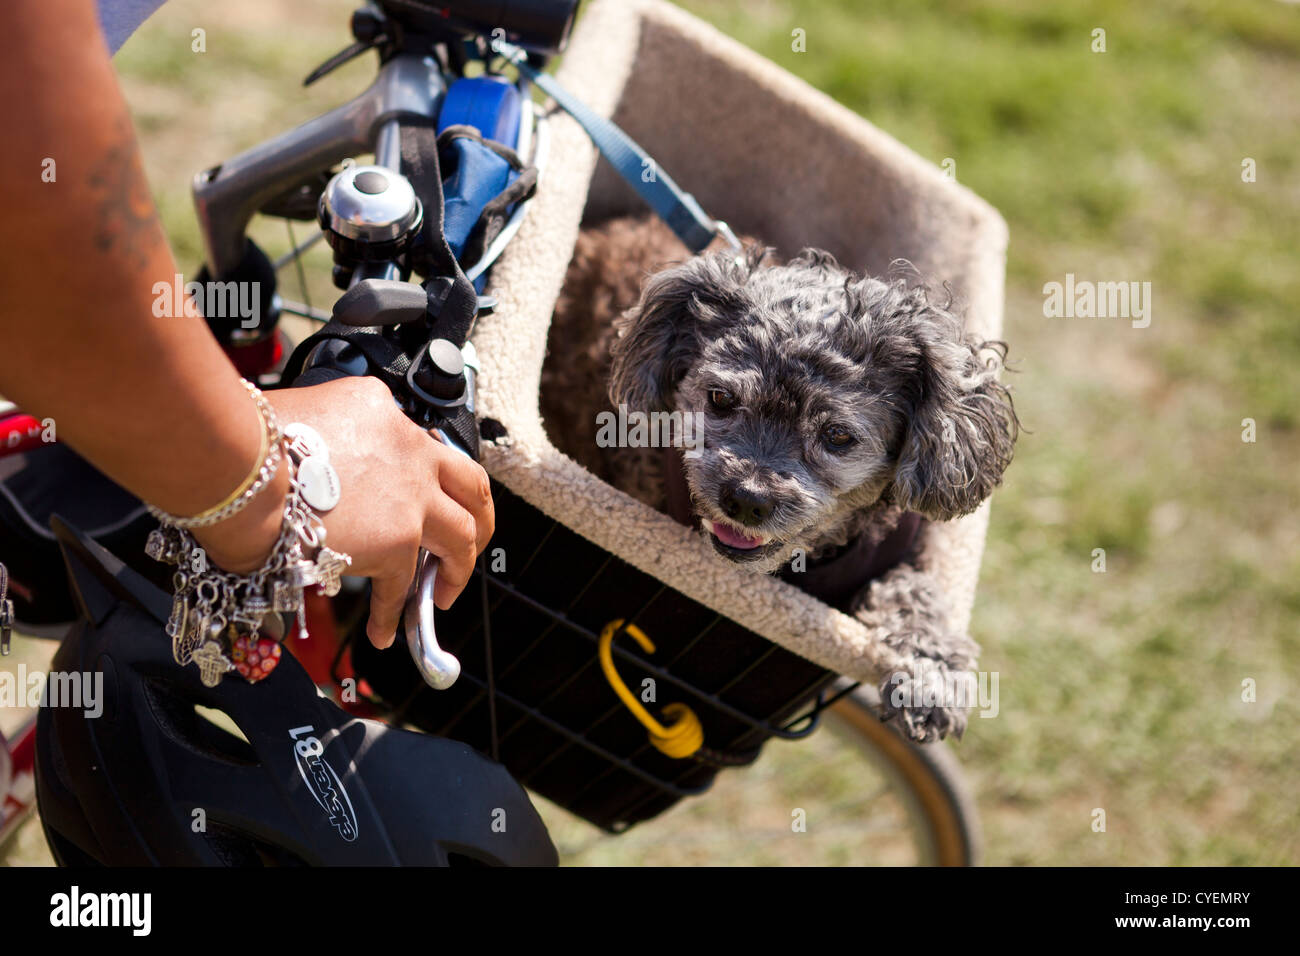 Small dog riding in bicycle basket Stock Photo